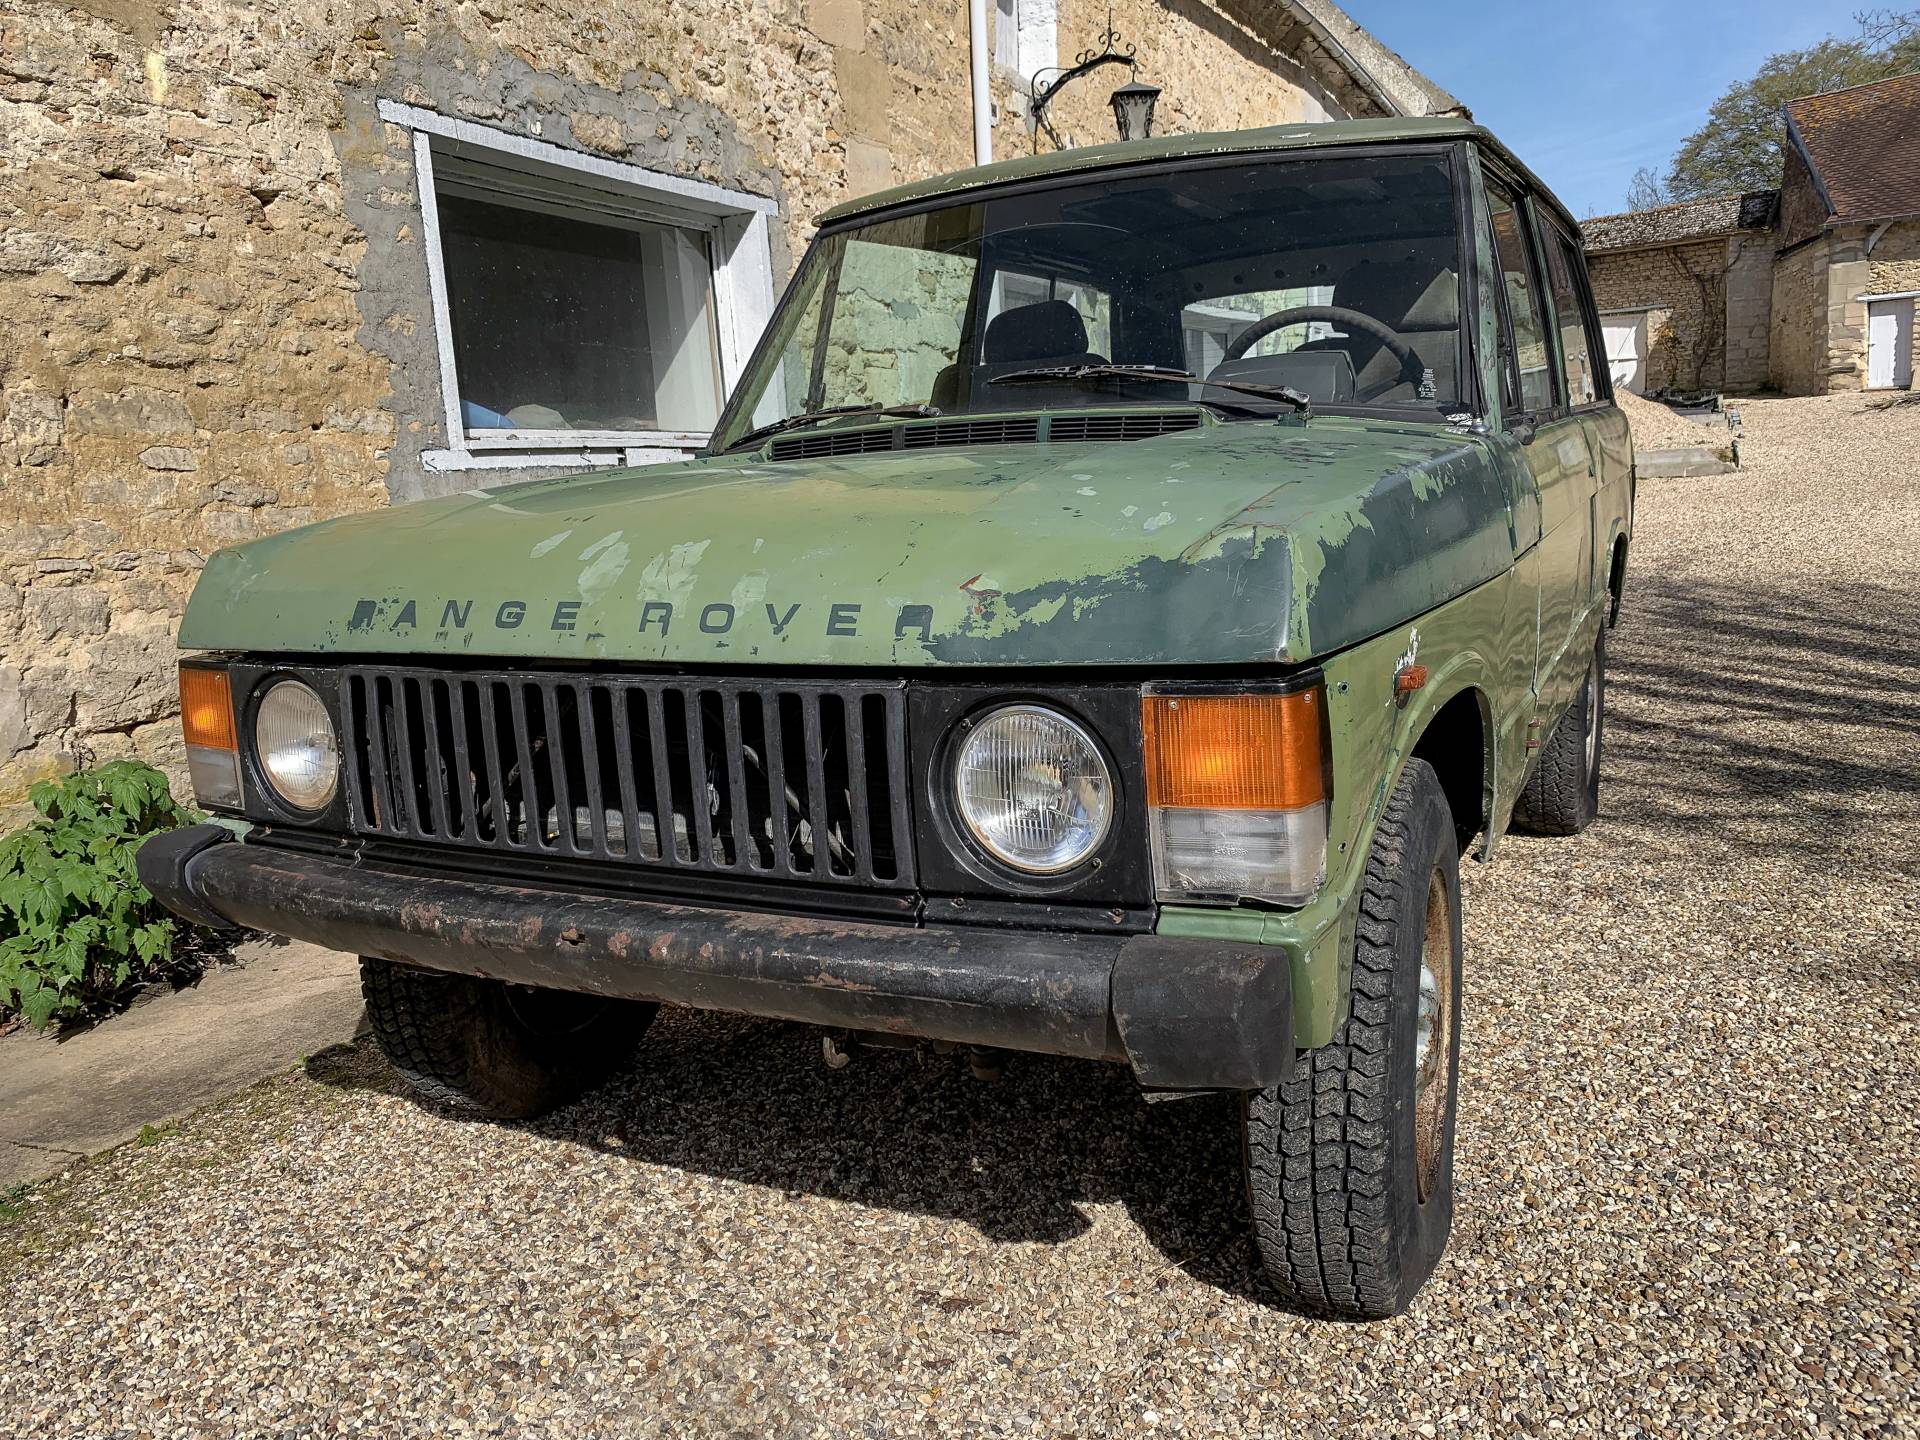 For Sale: Land Rover Range Rover Classic (1982) offered for £6,524